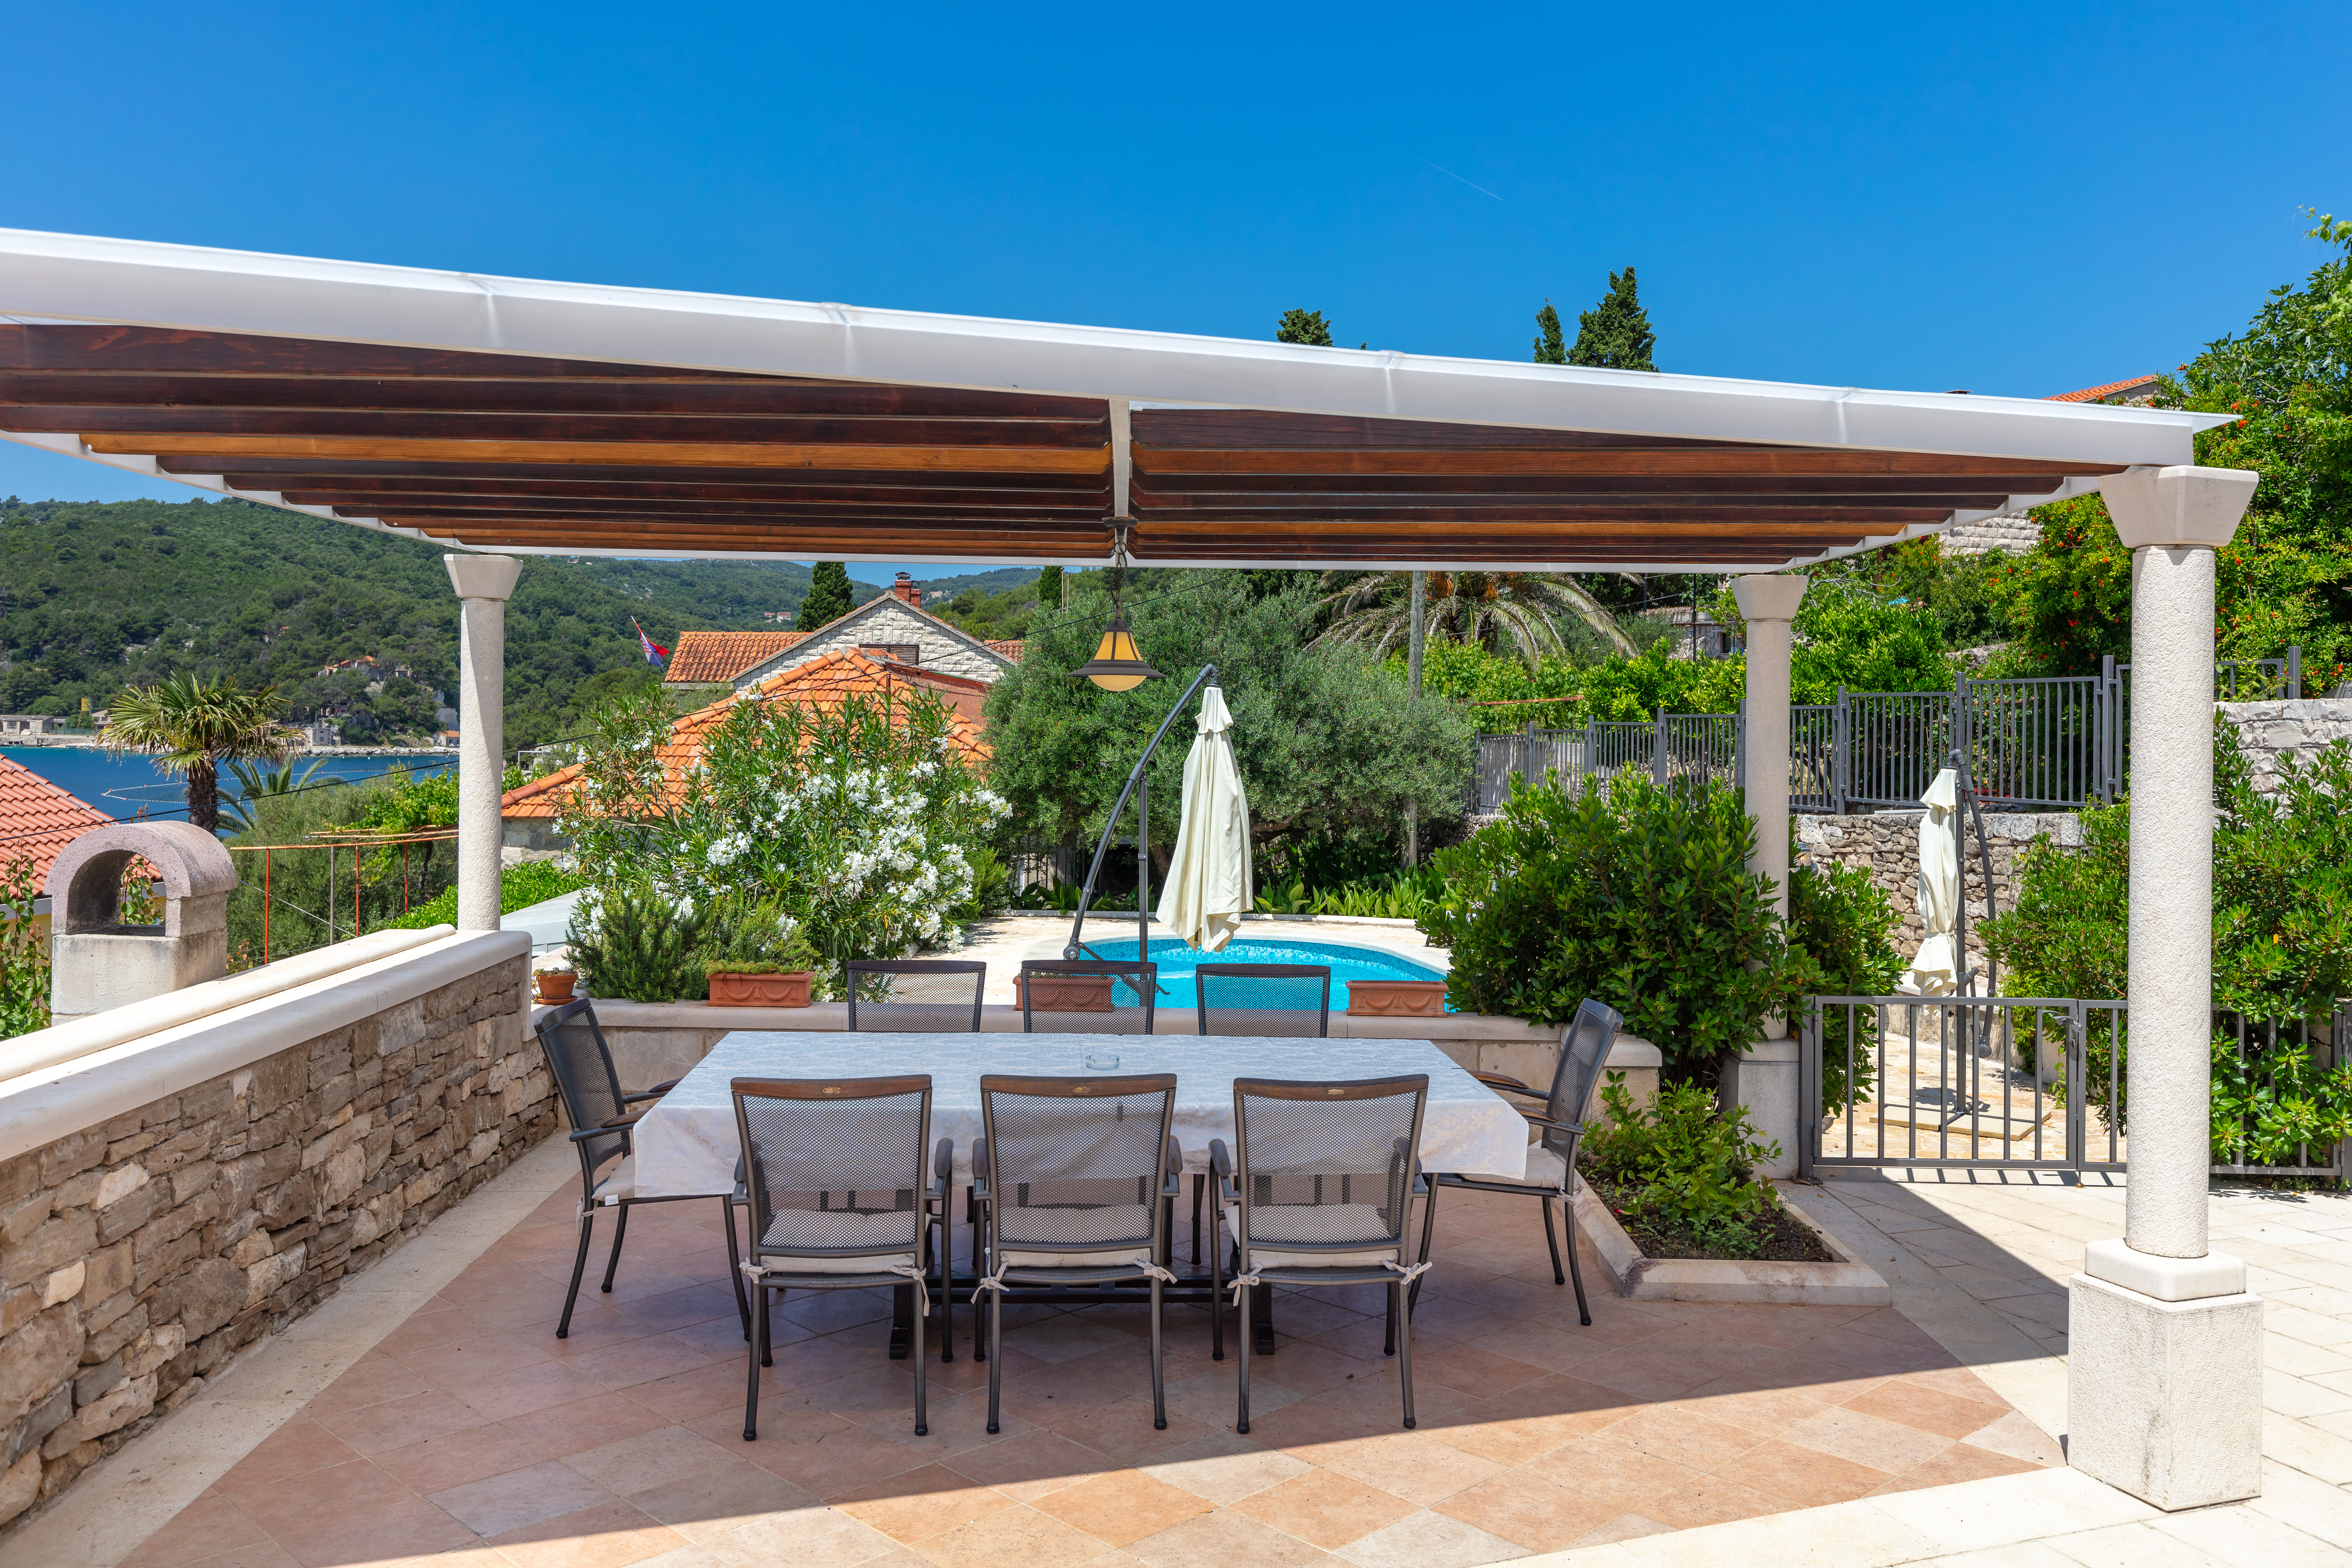 Covered outside dining area with swimming pool view